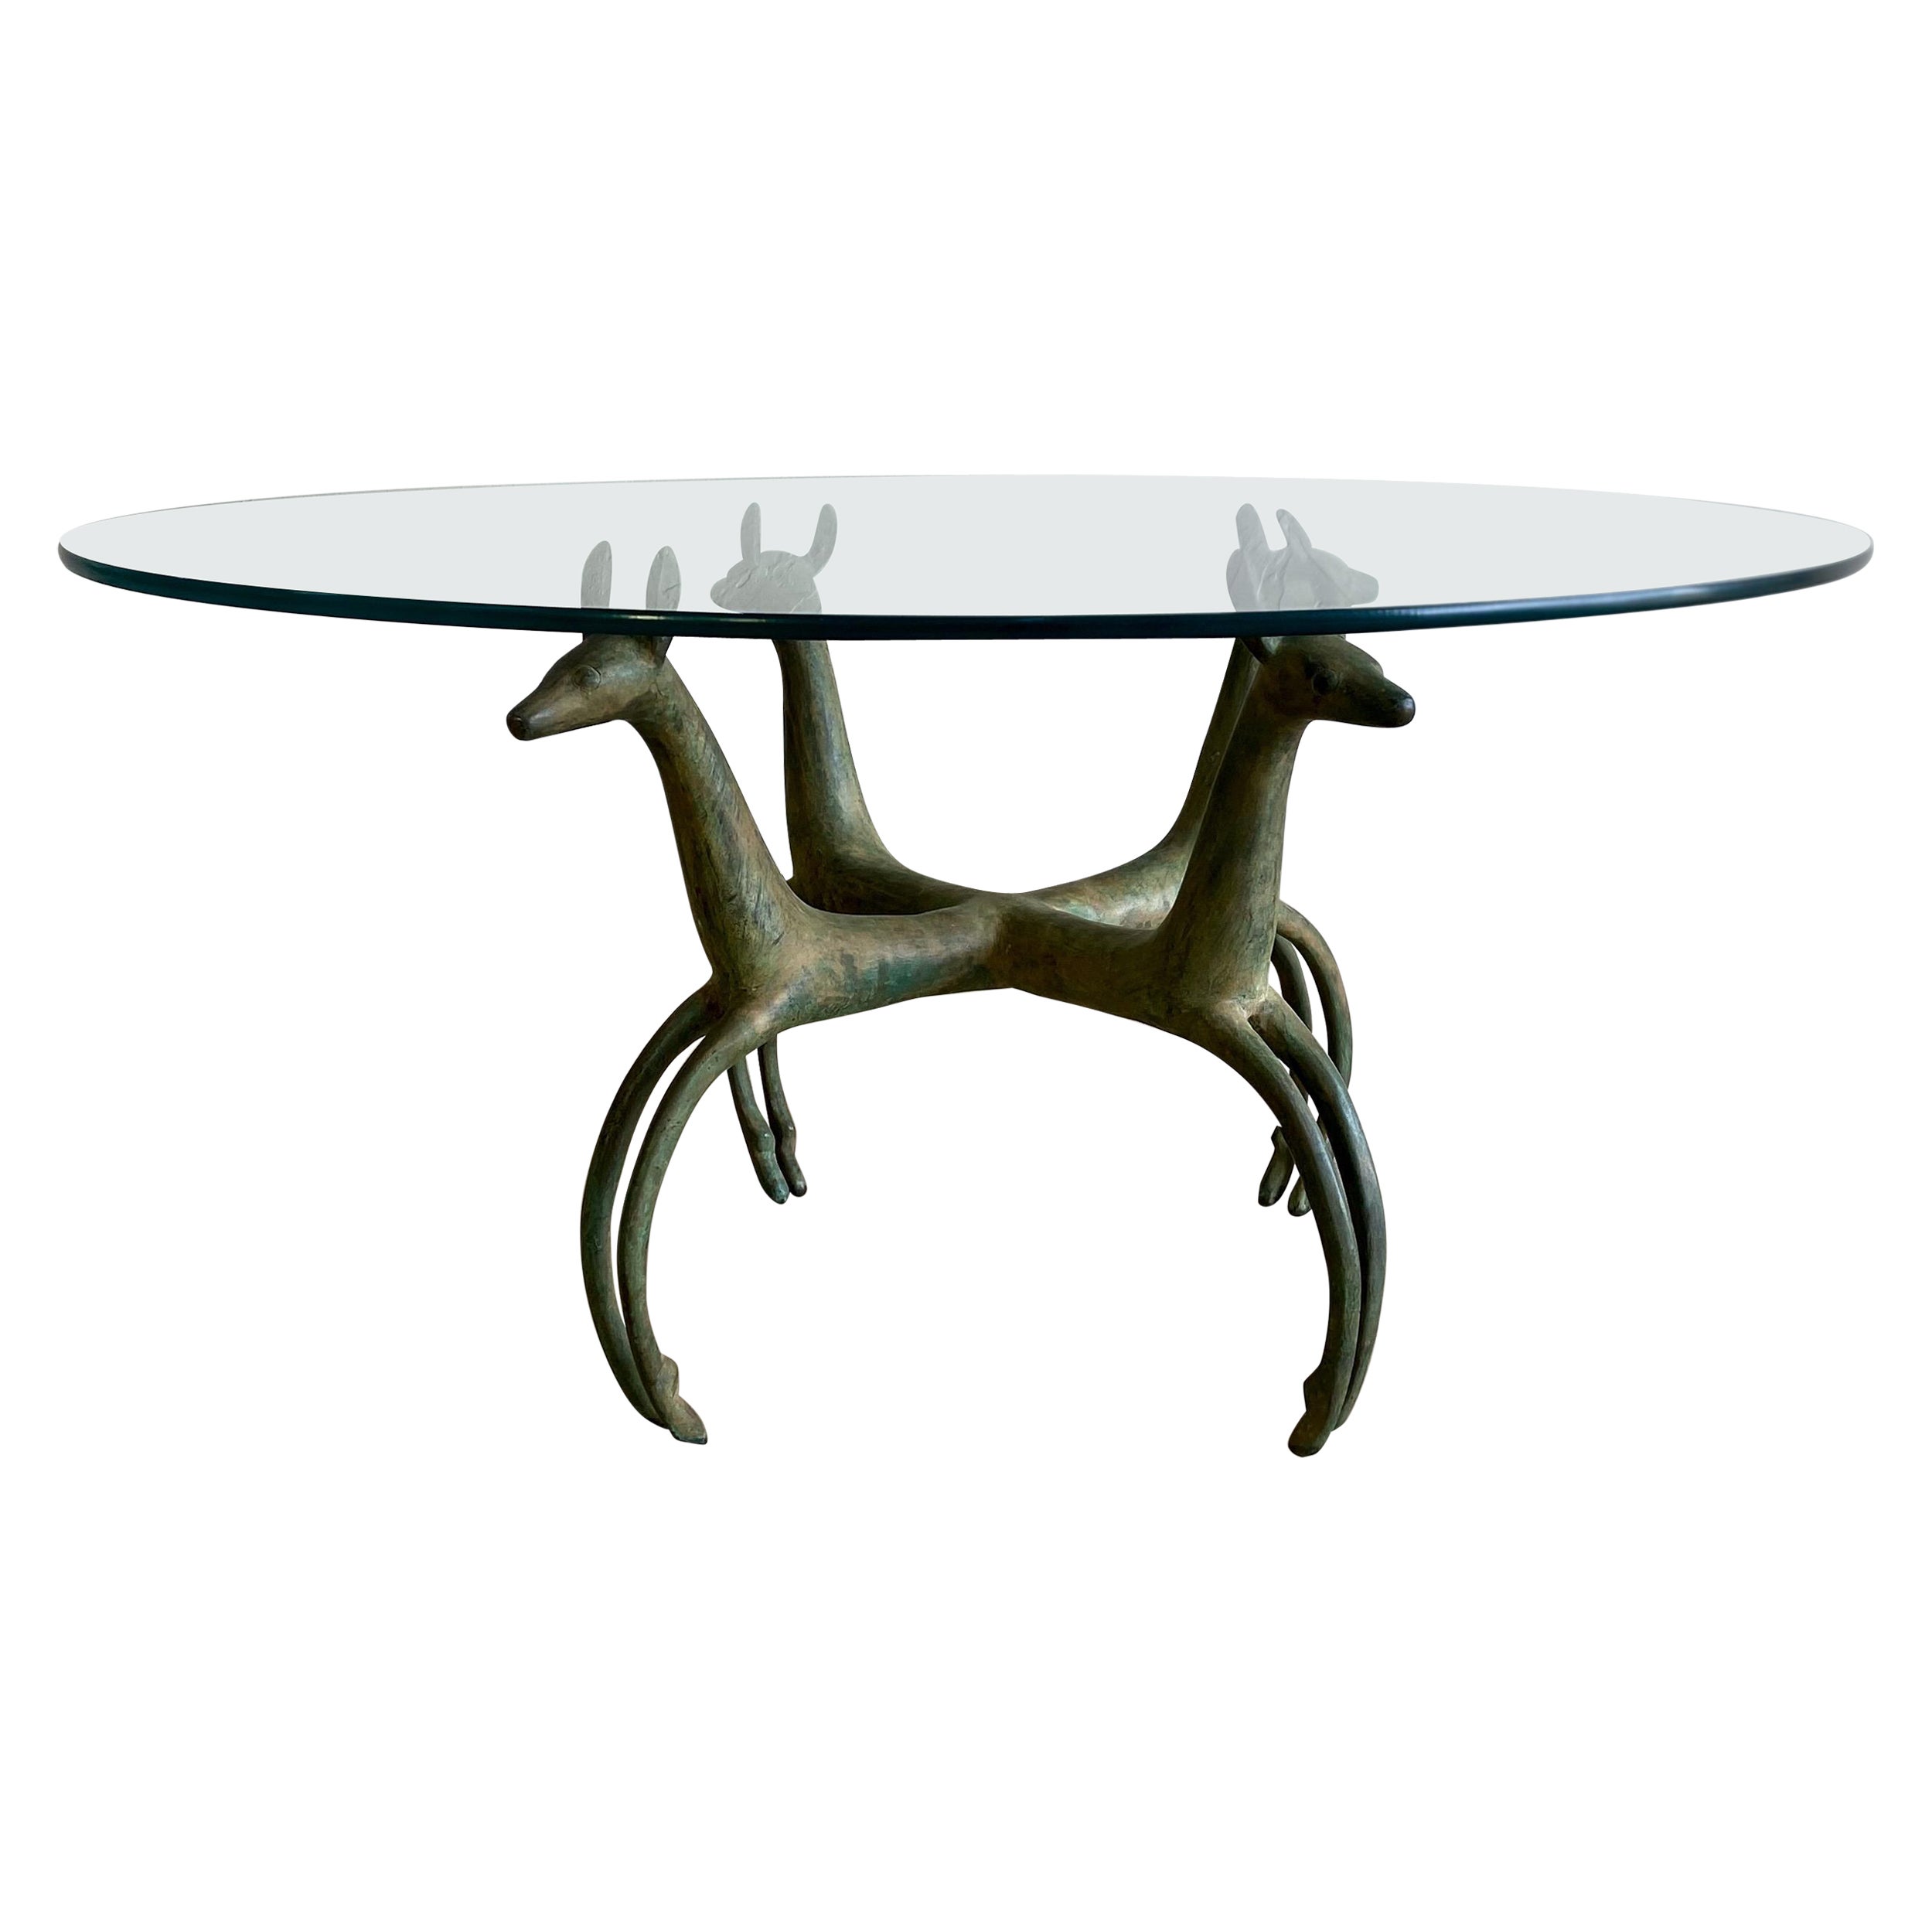 Armand-Albert Rateau Style Bronze Deer Sculptural Cocktail Table Mid Century